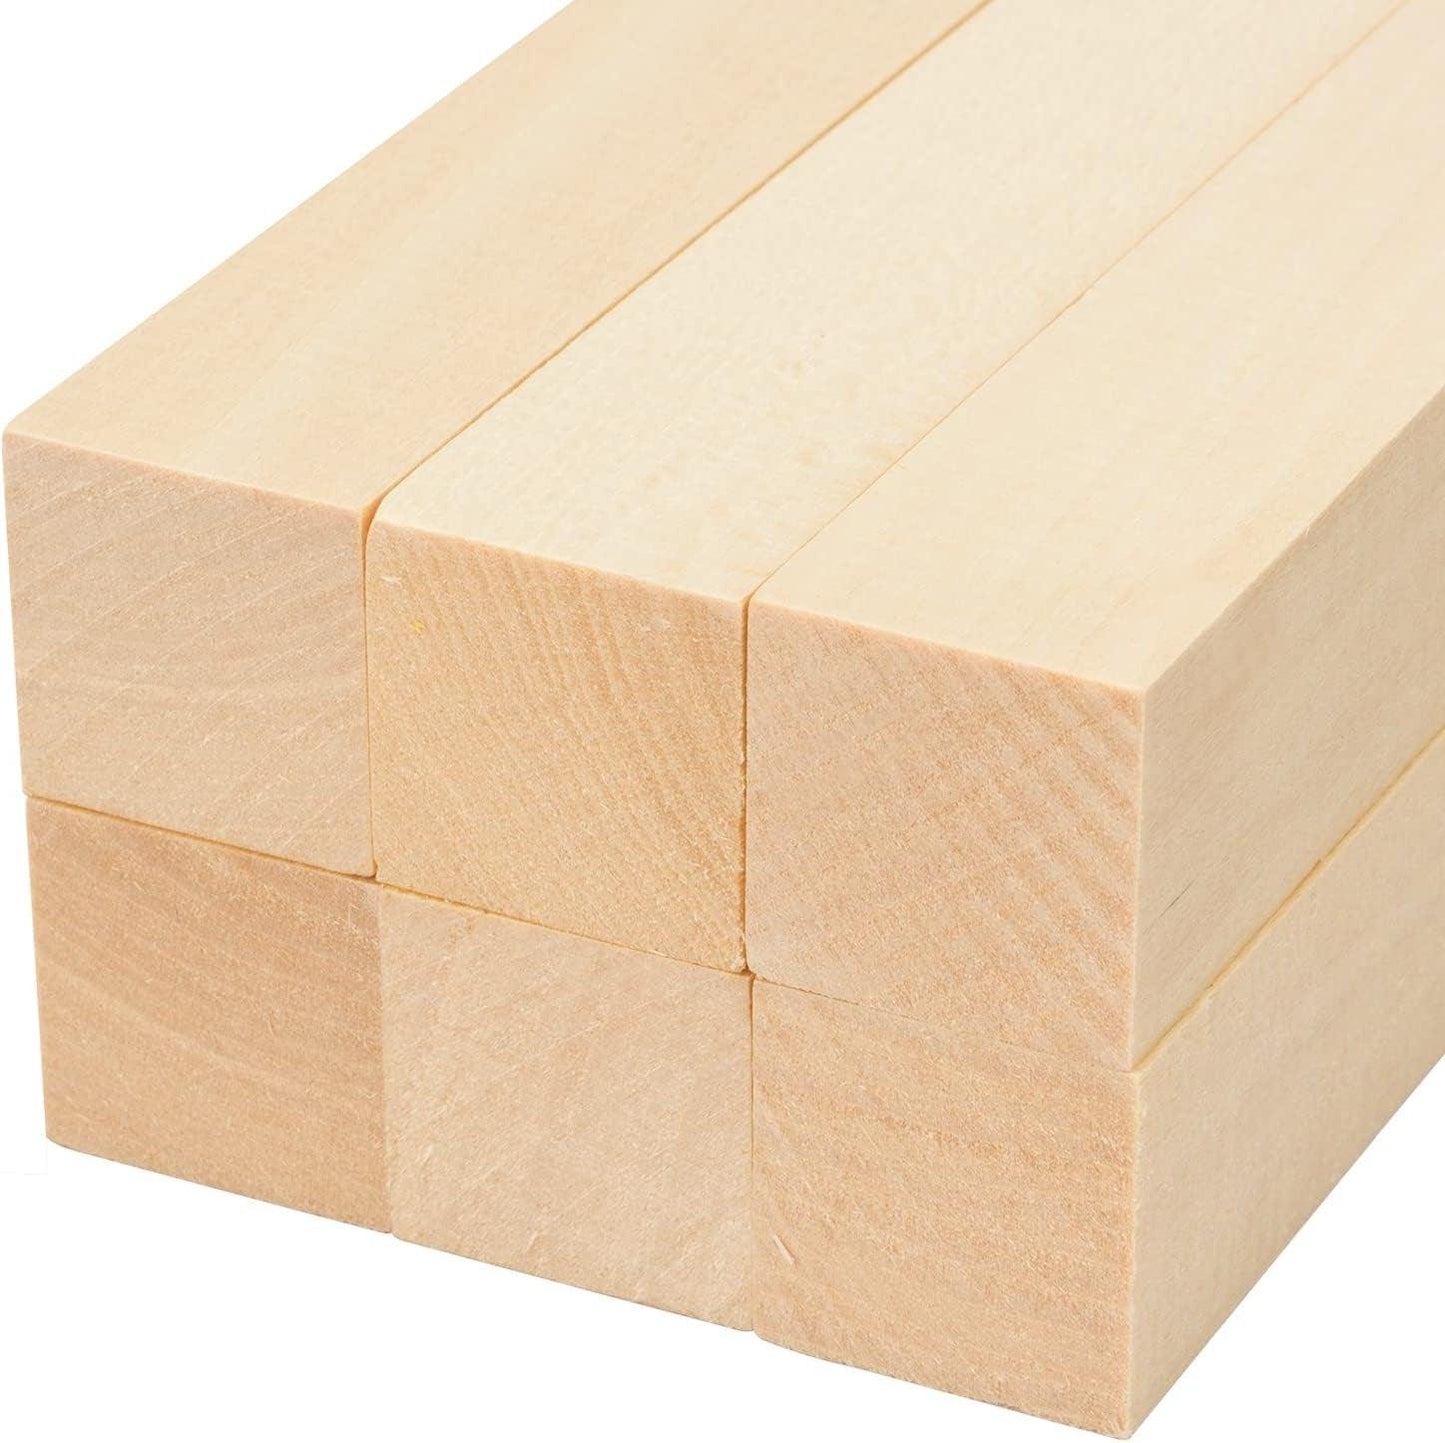 8 Pack Unfinished Basswood Carving Blocks Kit, 4 X 2 X 2 Inch Unfinished Bass Wood - WoodArtSupply